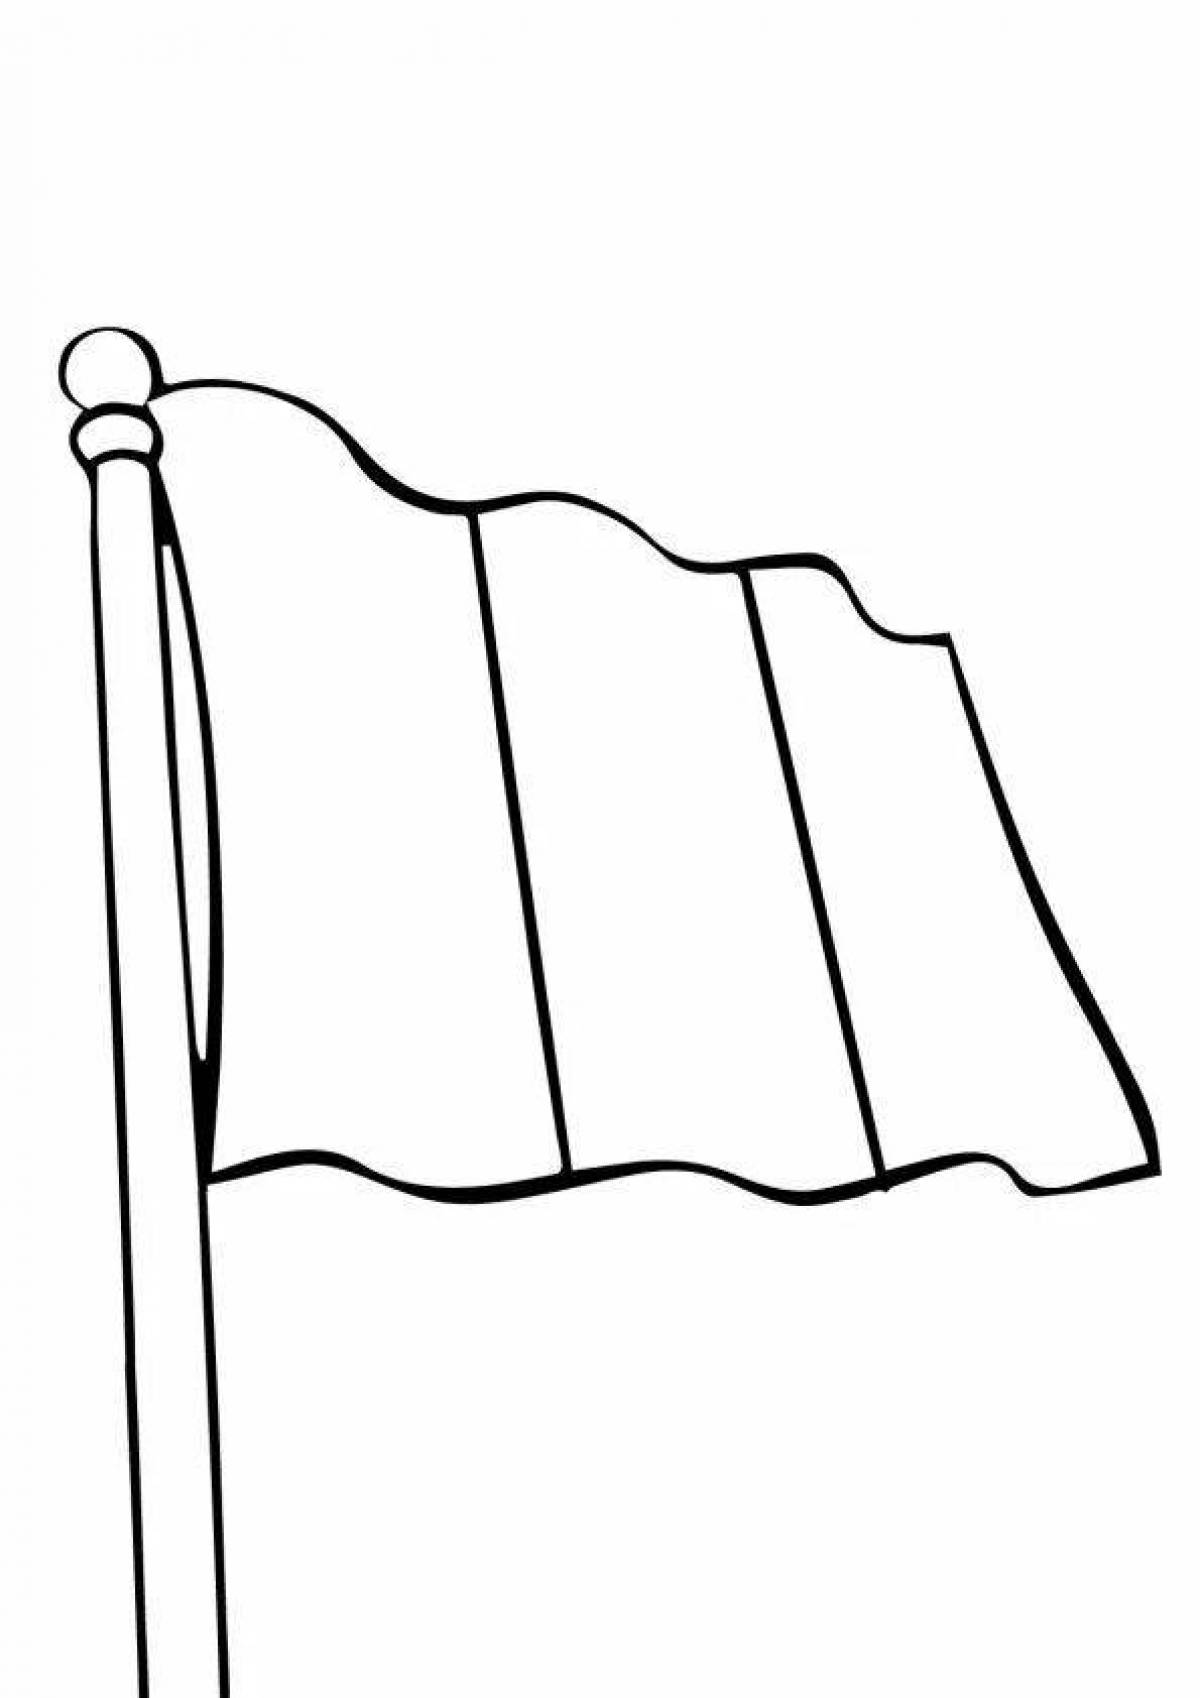 Impressive italy flag coloring page